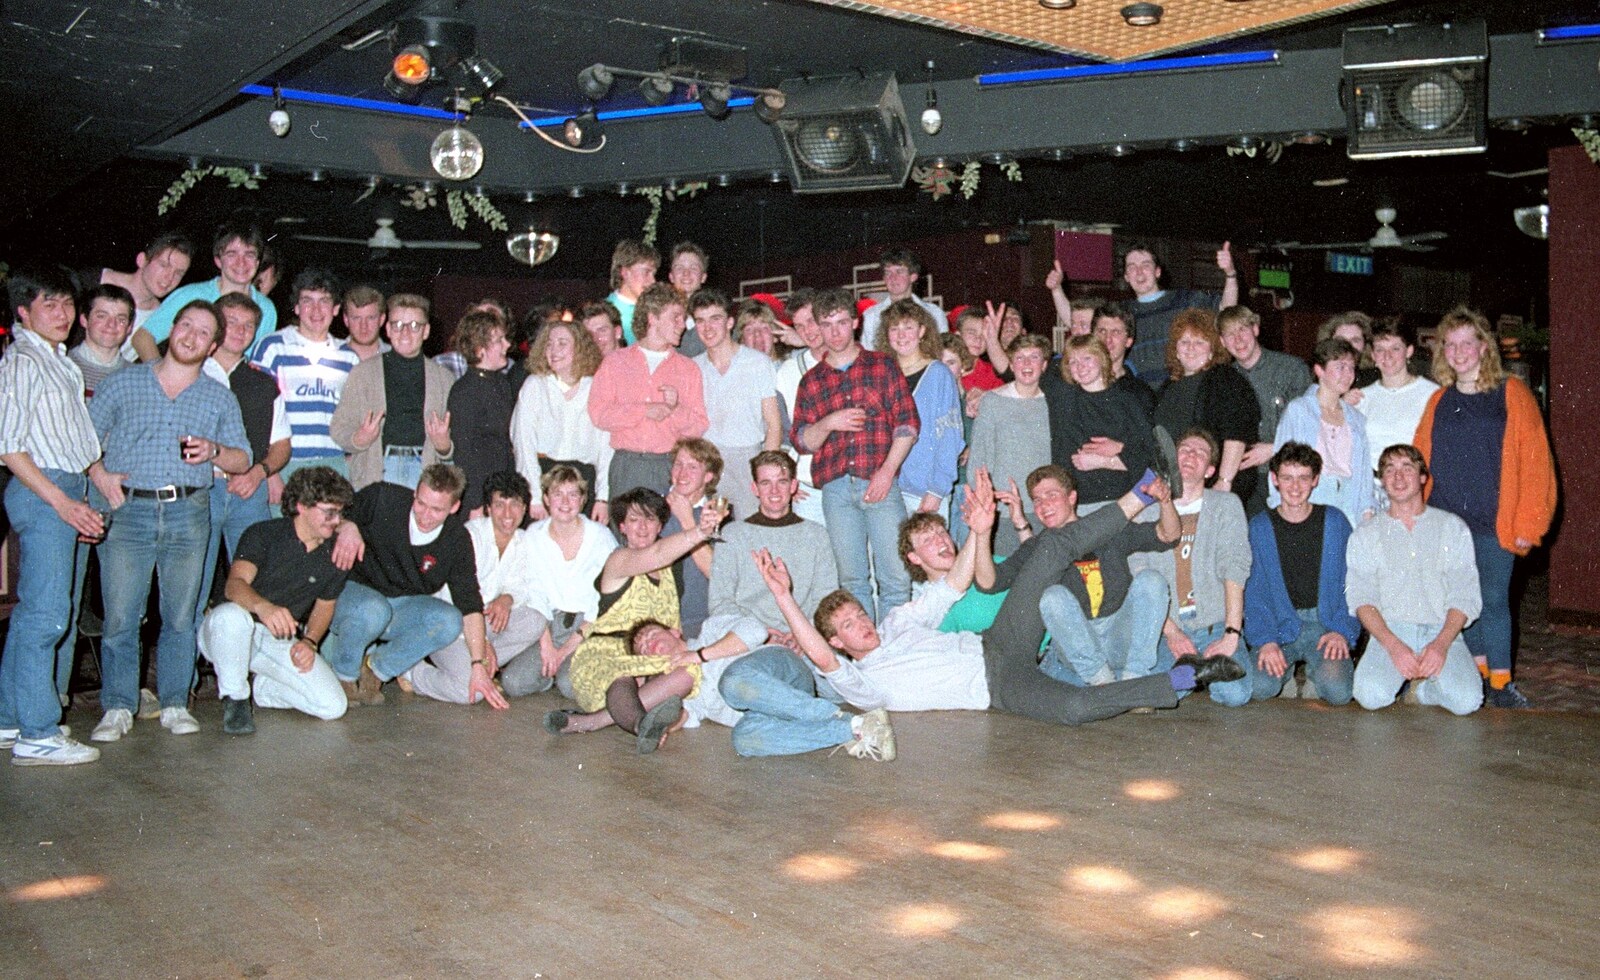 There's a pile-up on the dancefloor from Uni: A Party in Snobs Nightclub, Mayflower Street, Plymouth - 18th October 1986